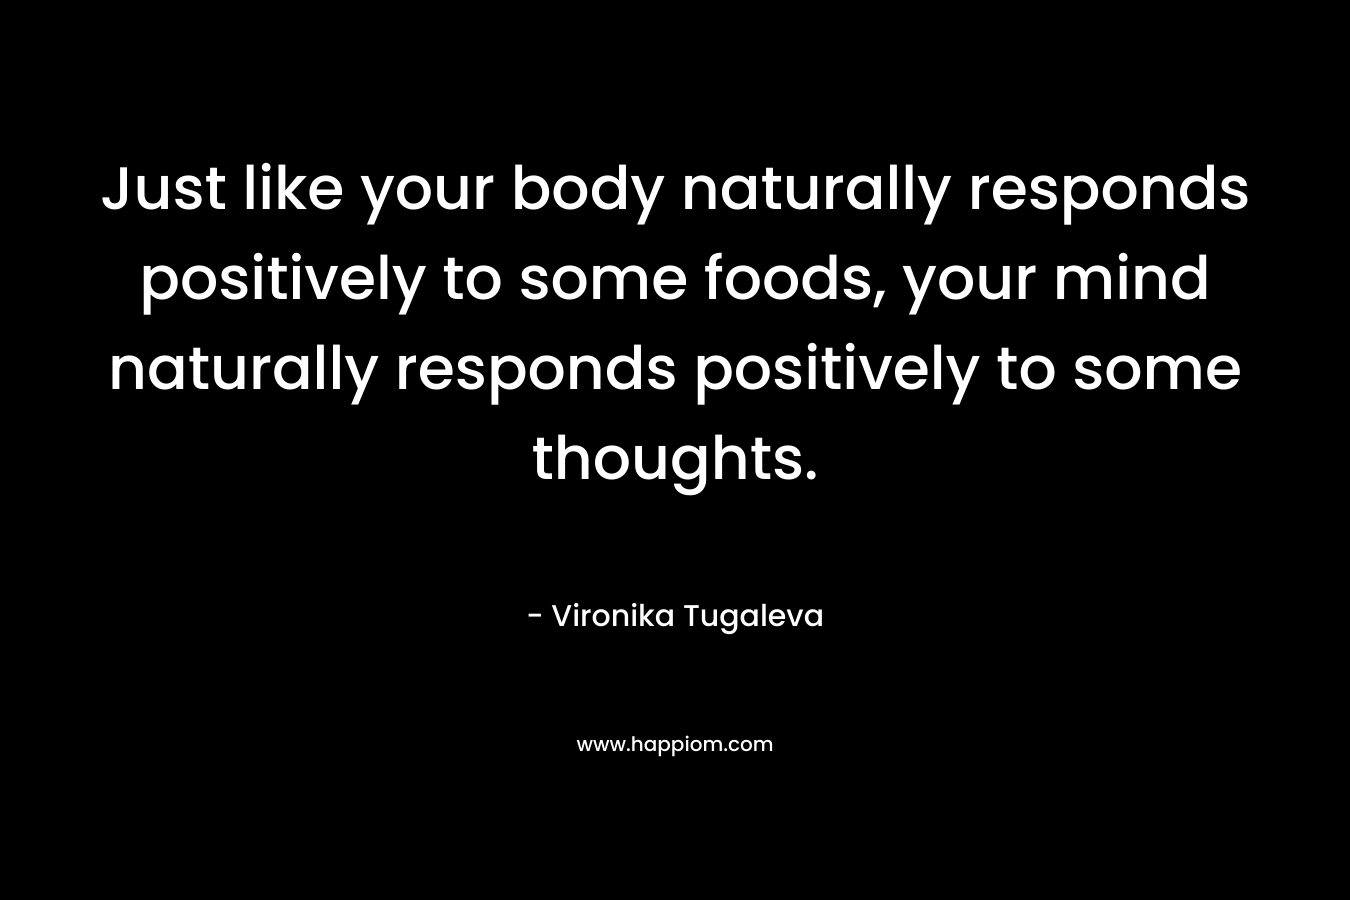 Just like your body naturally responds positively to some foods, your mind naturally responds positively to some thoughts.